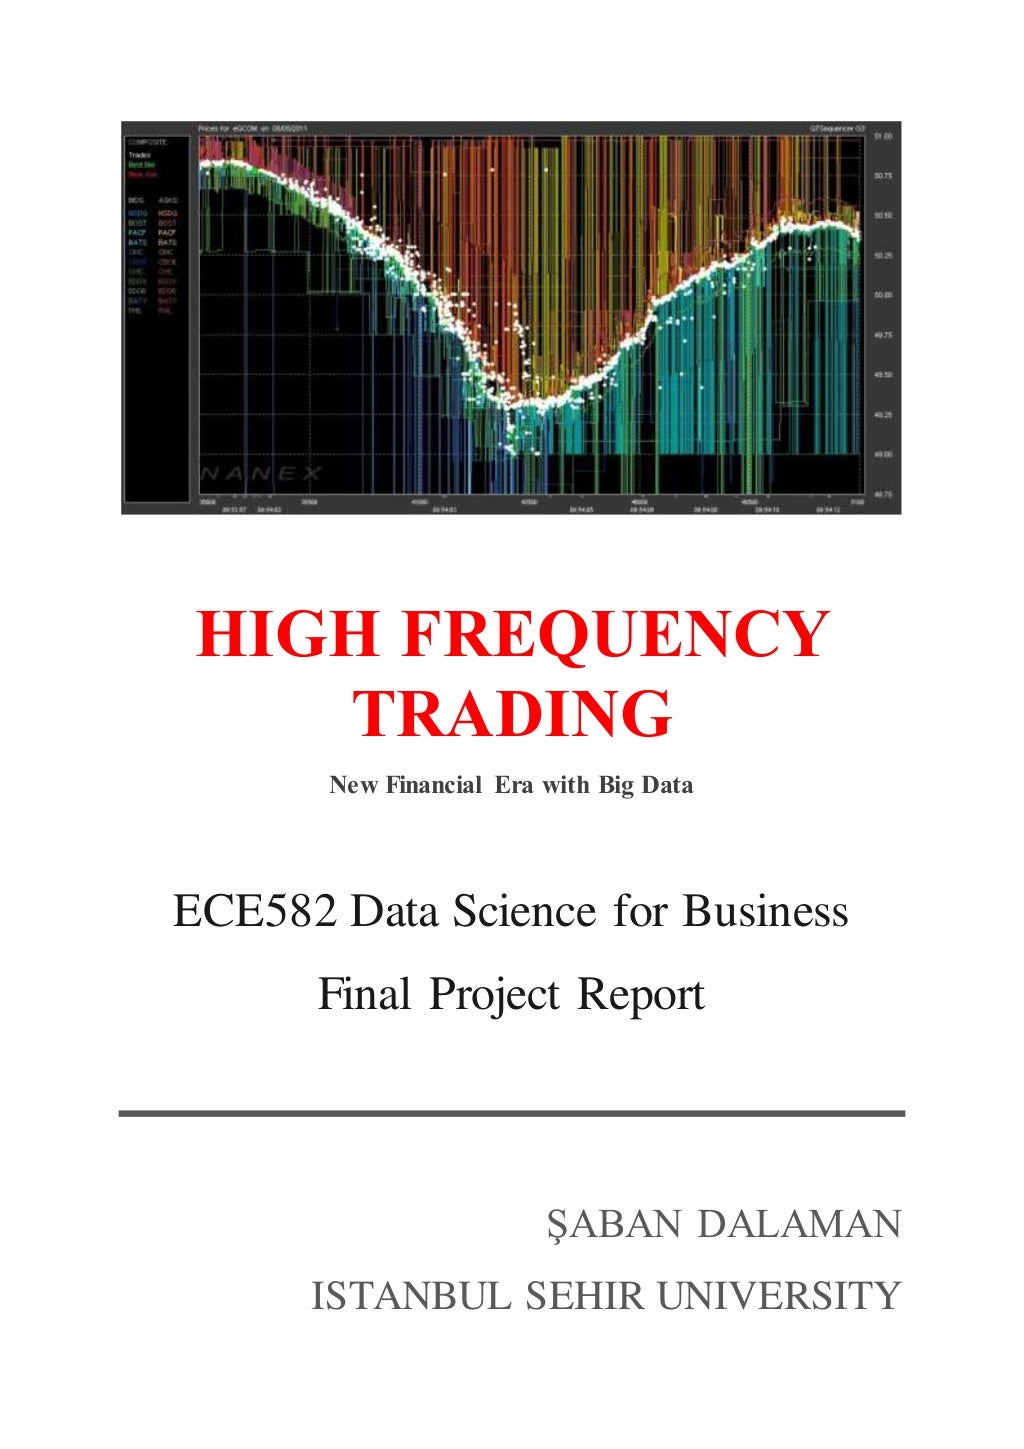 High frequency trading